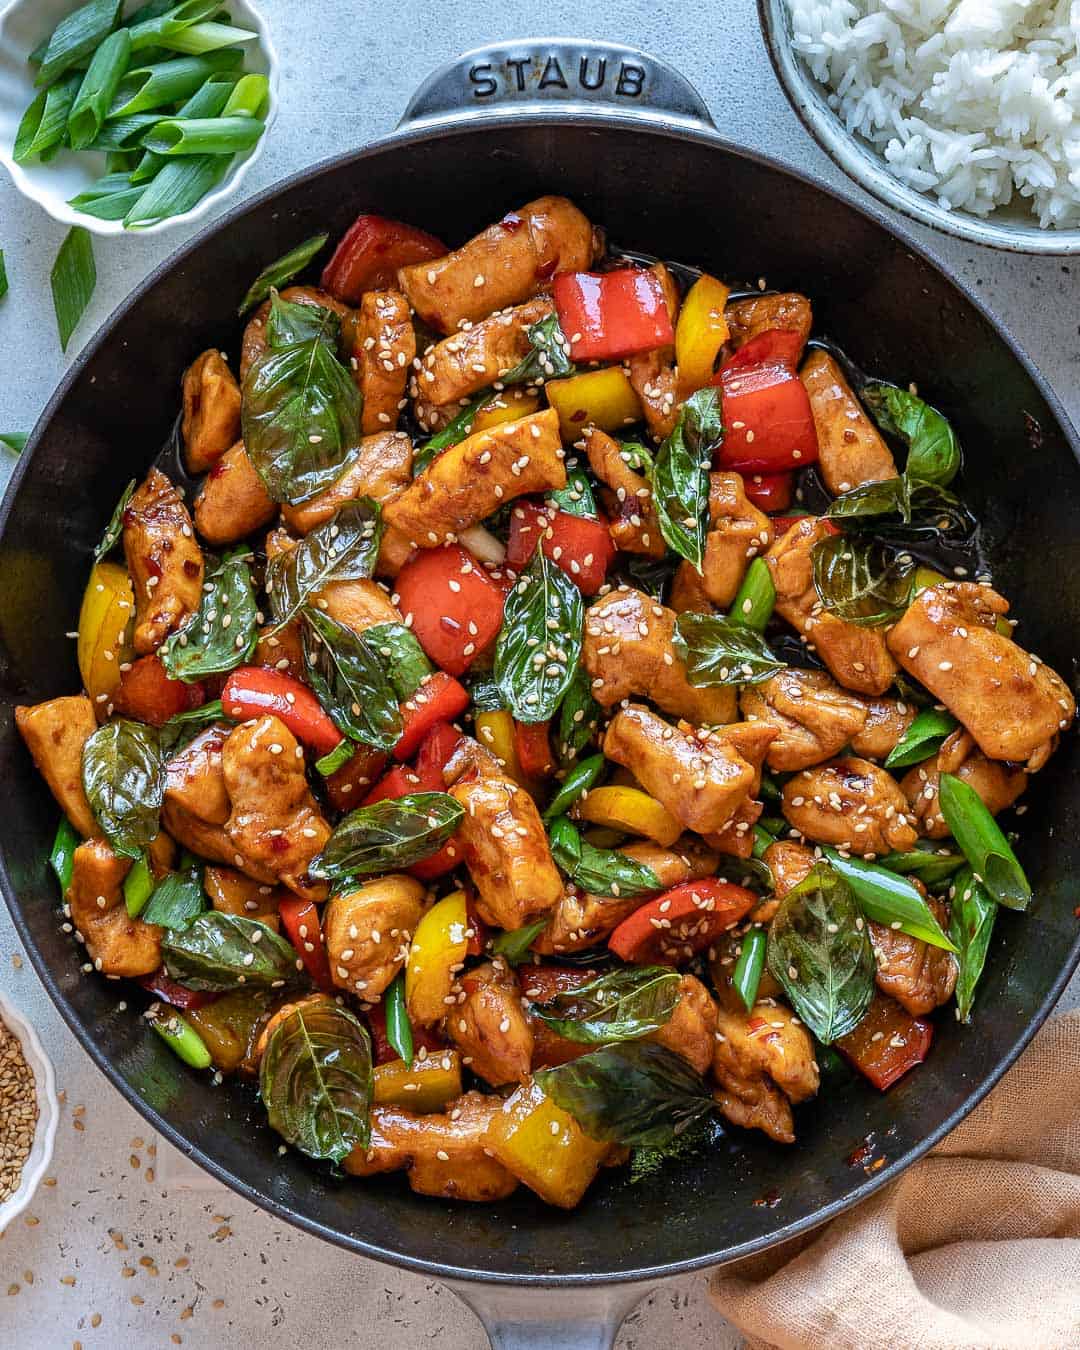 Easy Thai Basil Chicken Recipe Healthy Fitness Meals